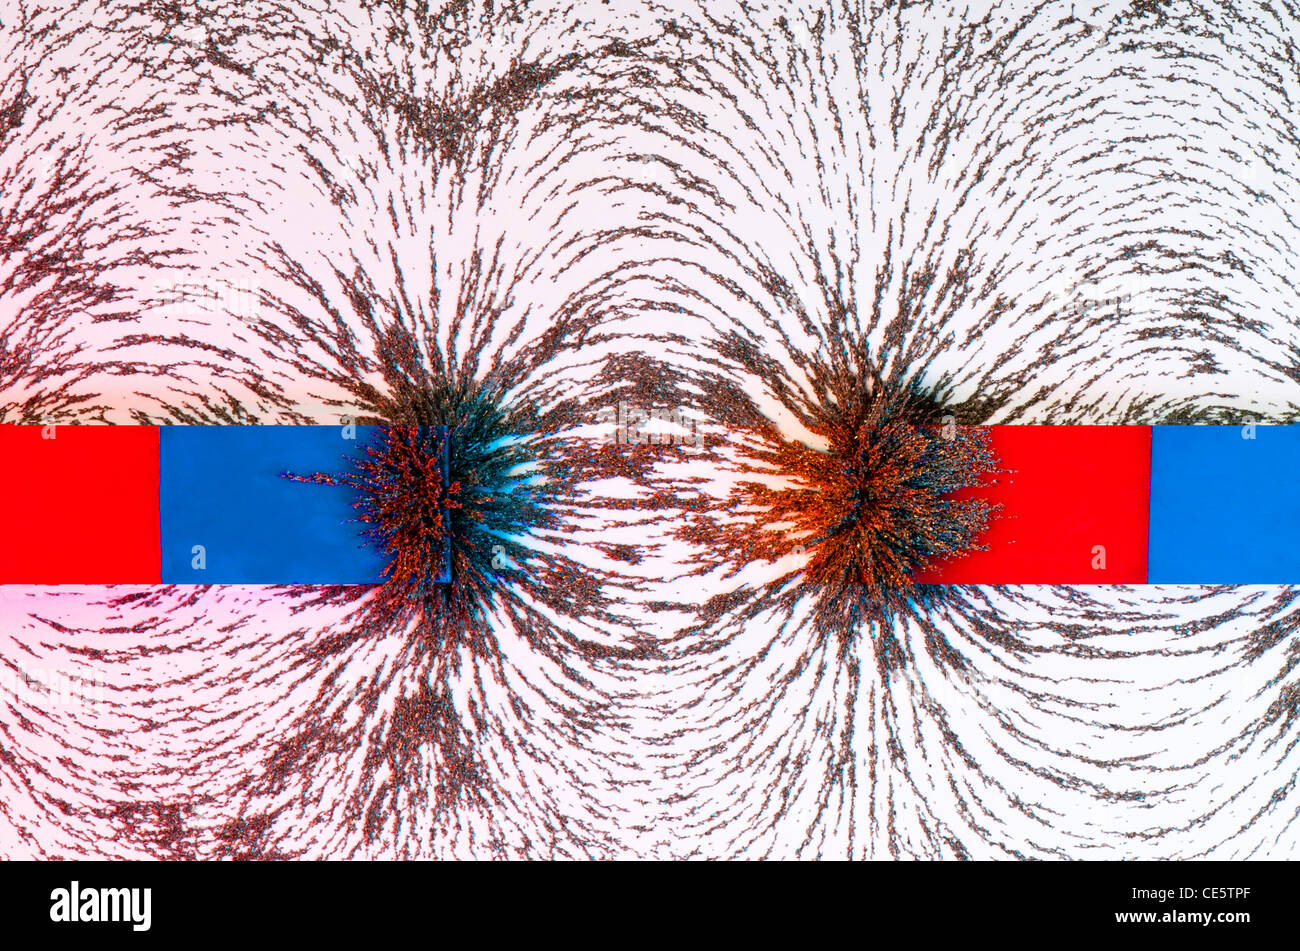 North and south `oles of a magnet with and the curved magnetic field shown by using iron filings illuminated in red and blue Stock Photo